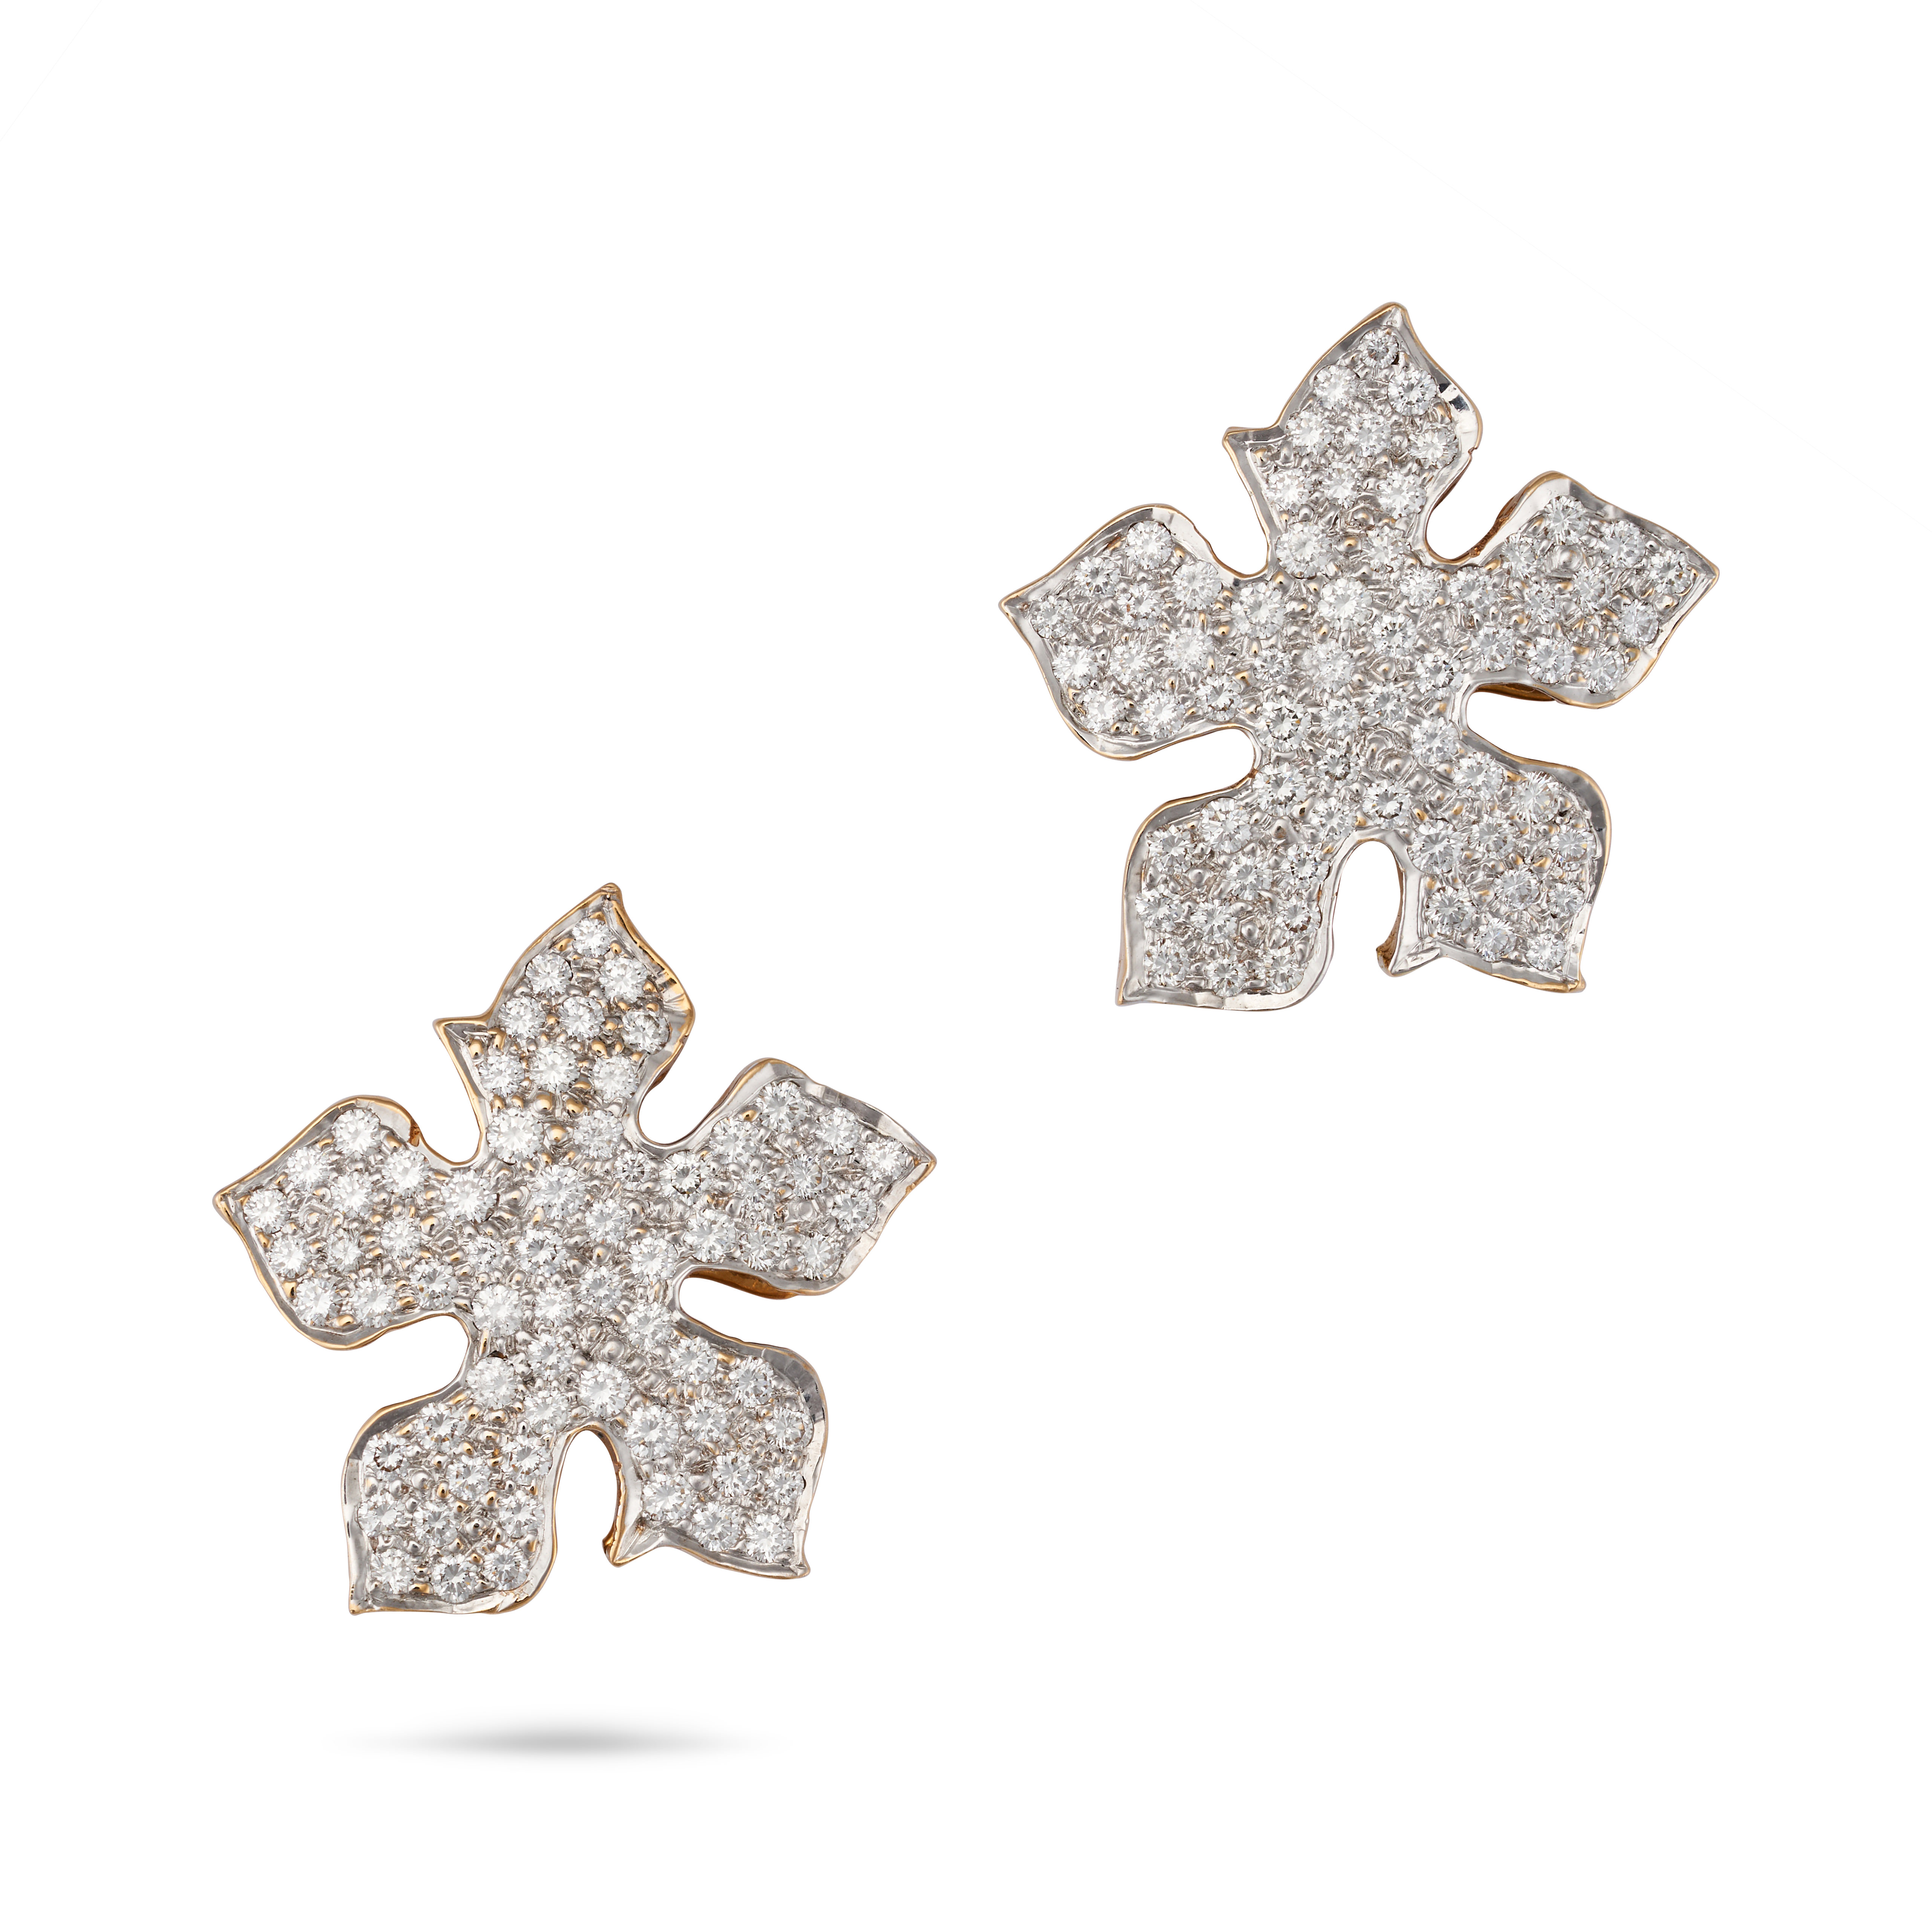 A PAIR OF DIAMOND SNOWFLAKE EARRINGS each designed as a stylised snowflake, pave set with round b...